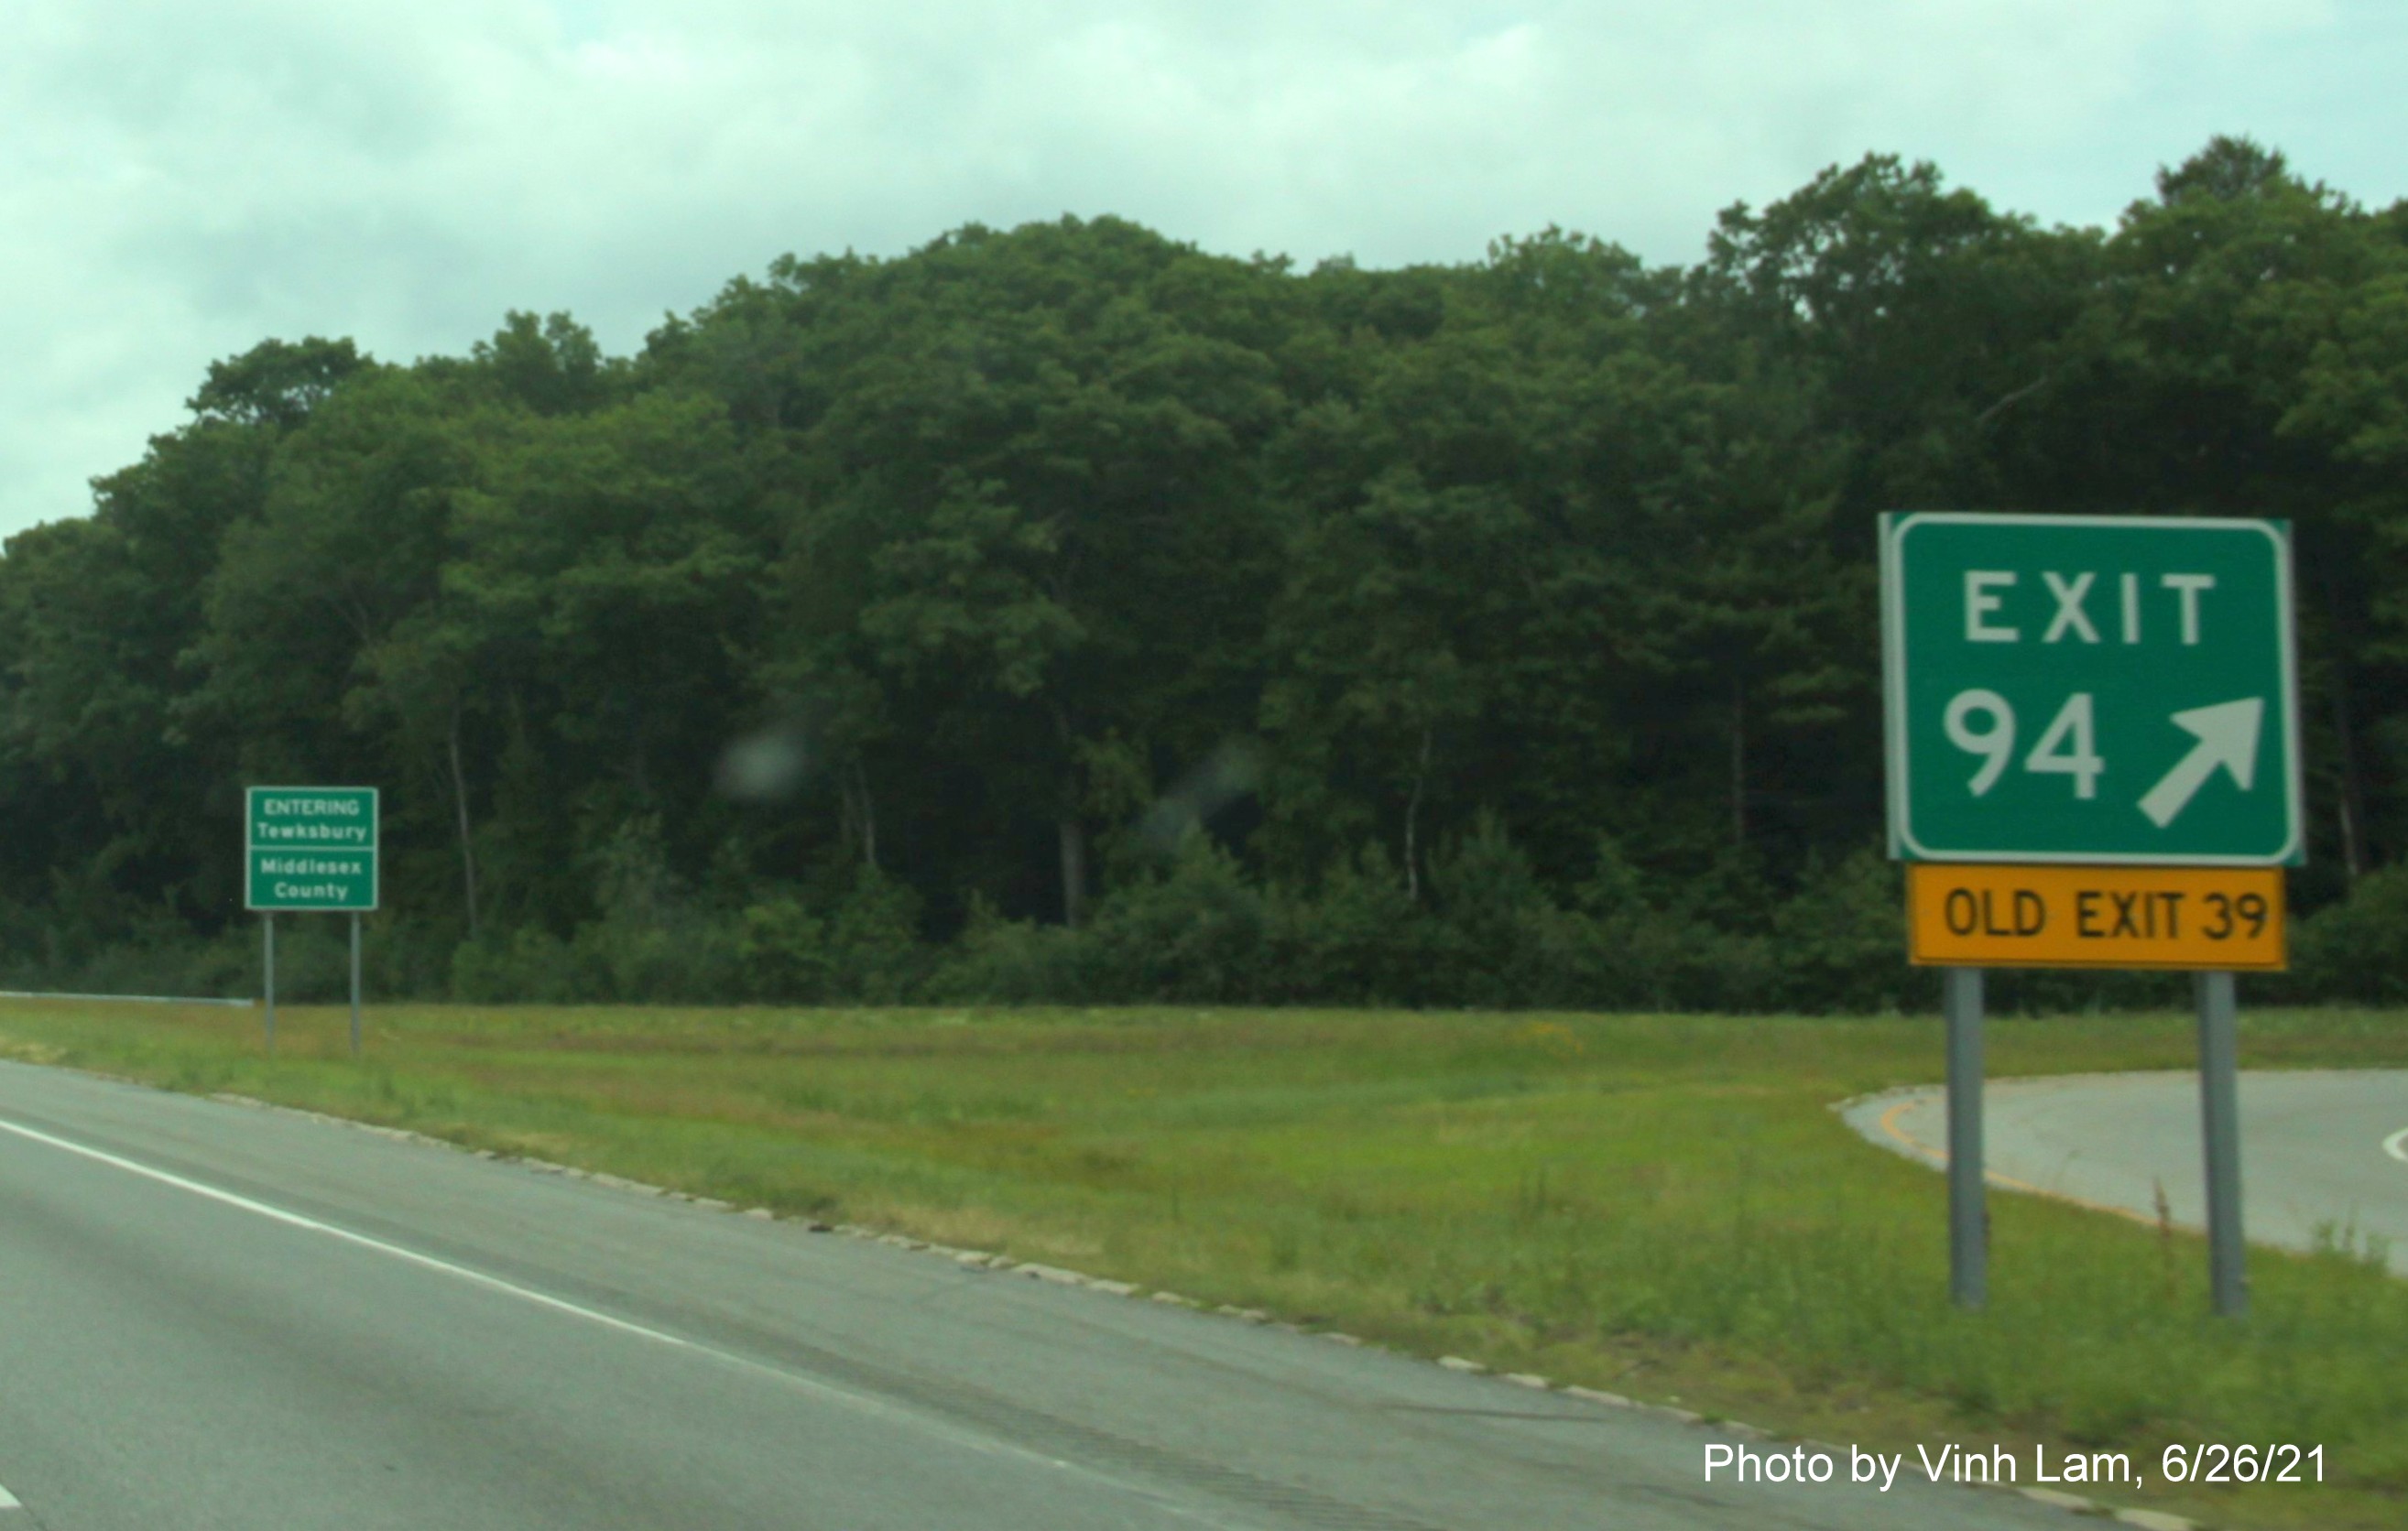 Image of gore sign for MA 133 exit with new milepost based exit number and yellow Old Exit 39 sign attached below on I-495 South in Andover, by Vinh Lam, June 2021